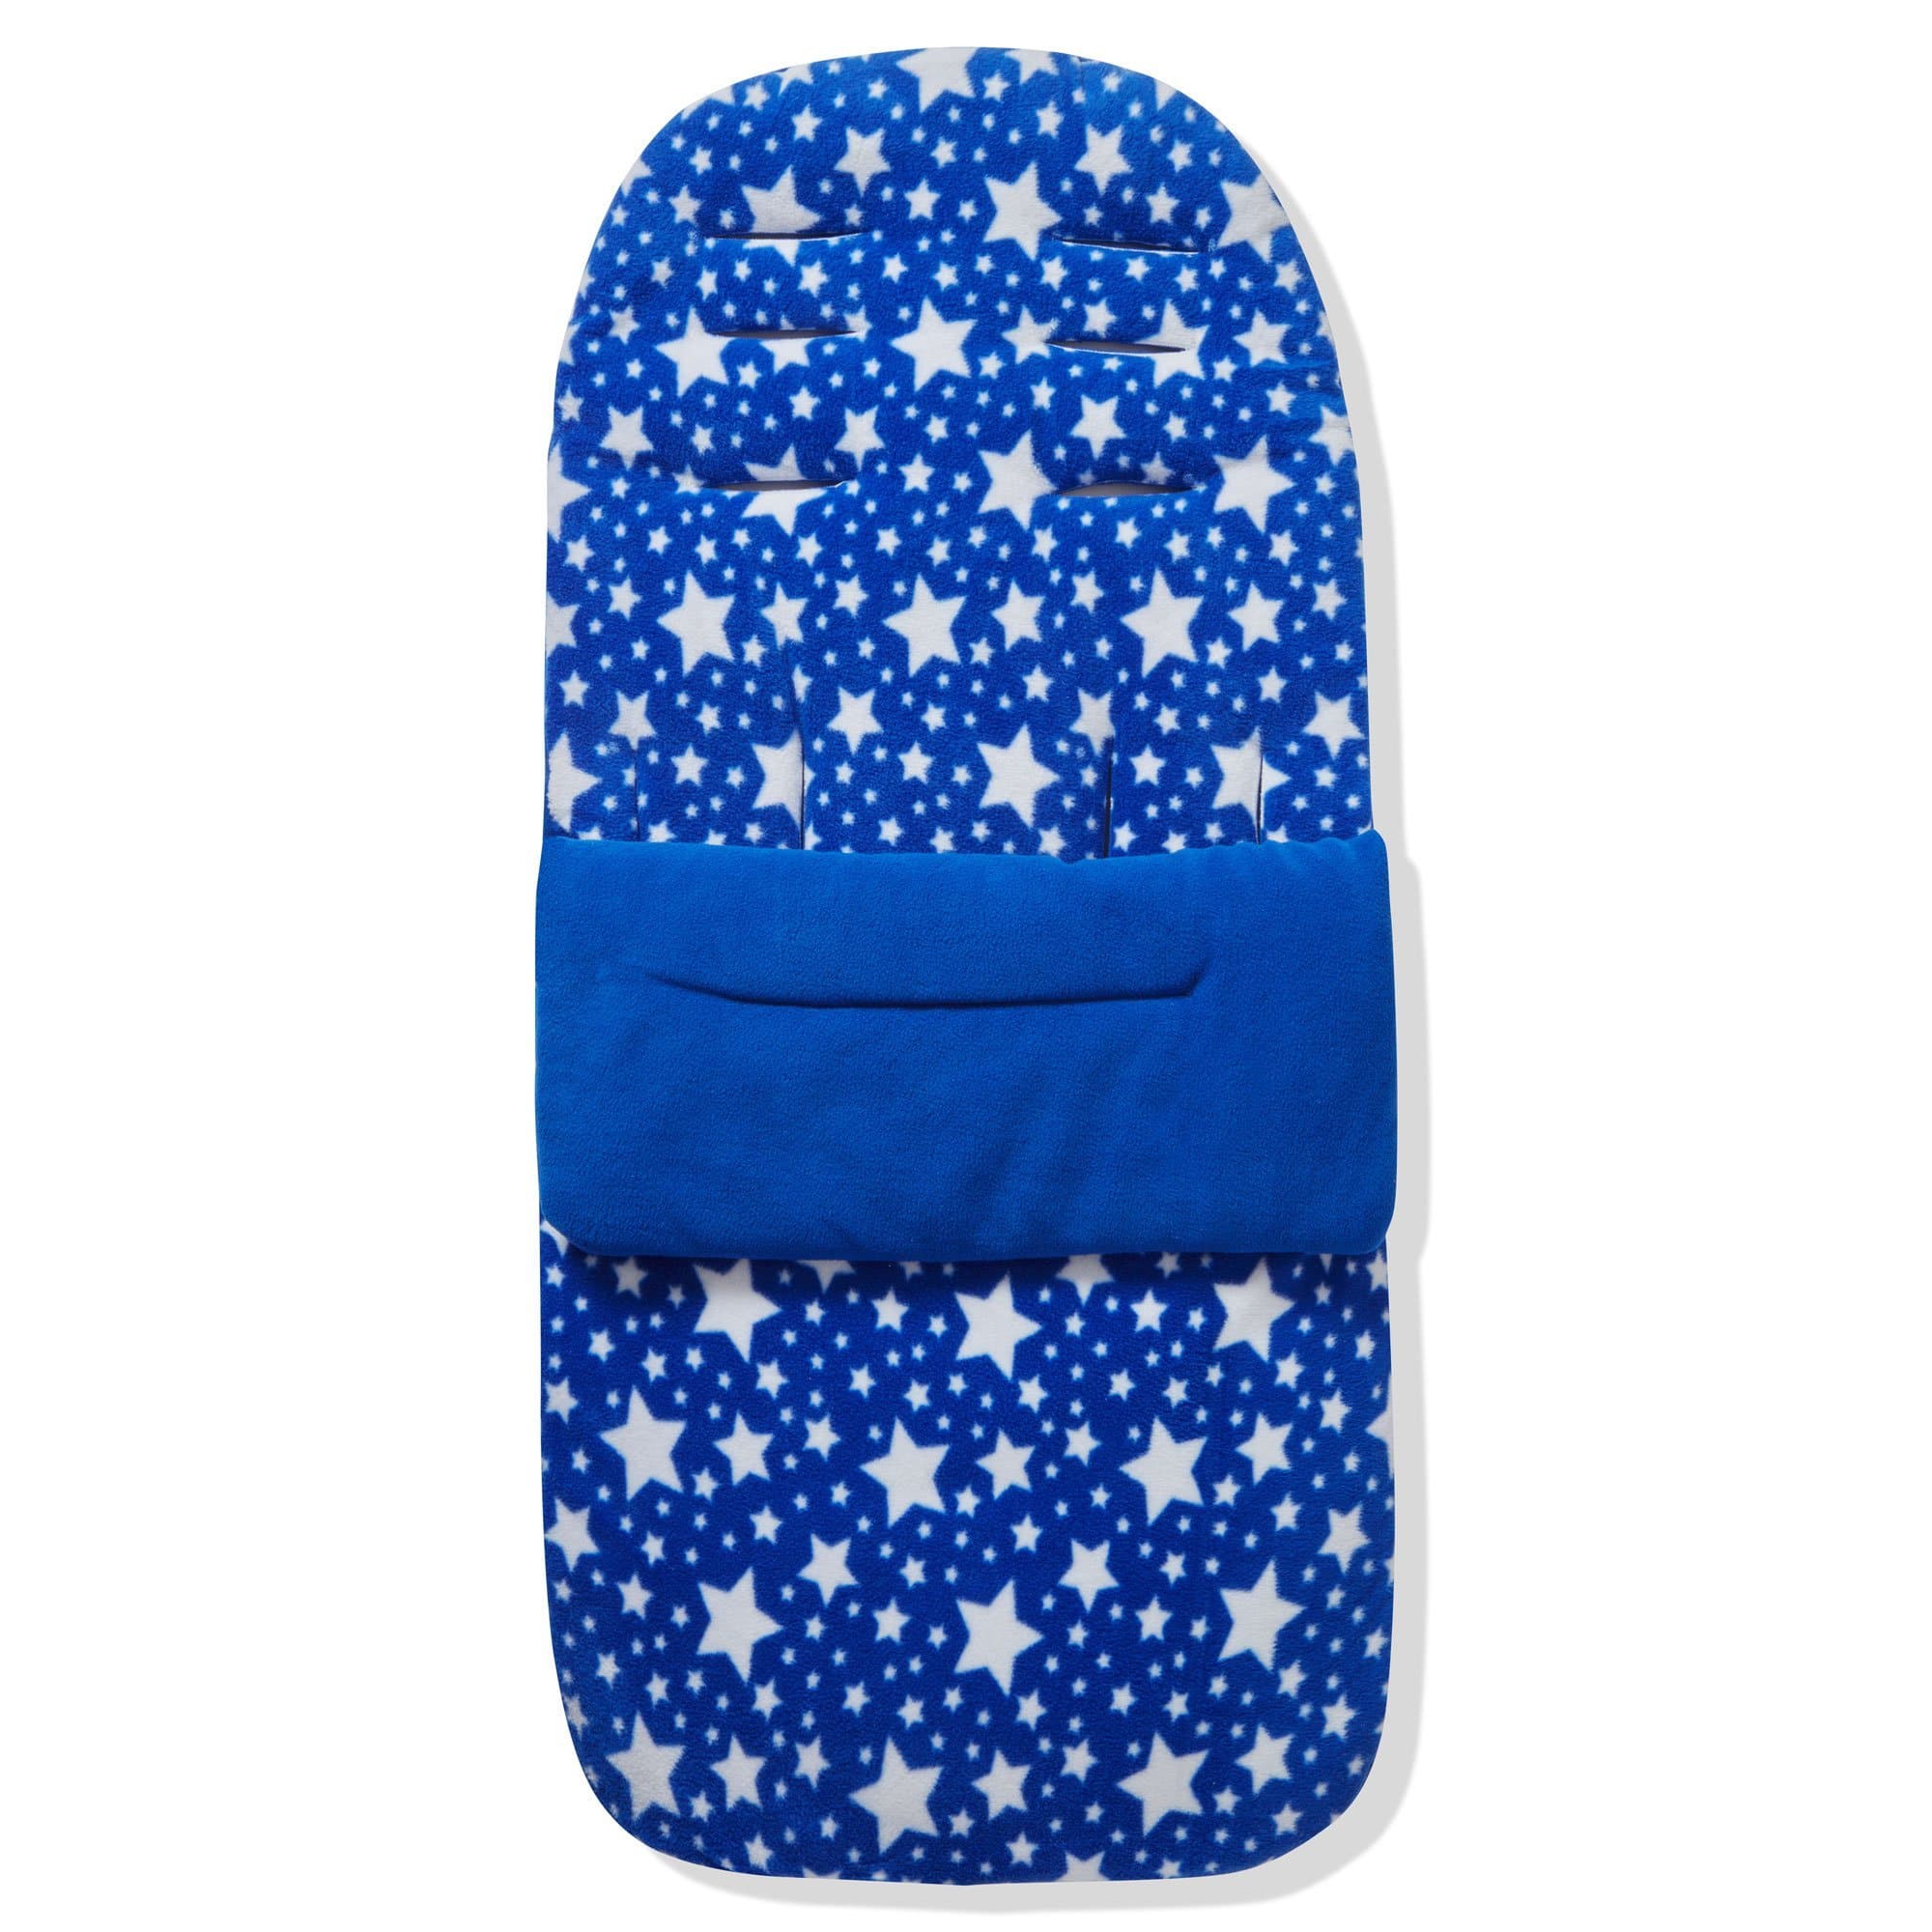 Fleece Footmuff / Cosy Toes Compatible with Quax - Blue Star / Fits All Models | For Your Little One